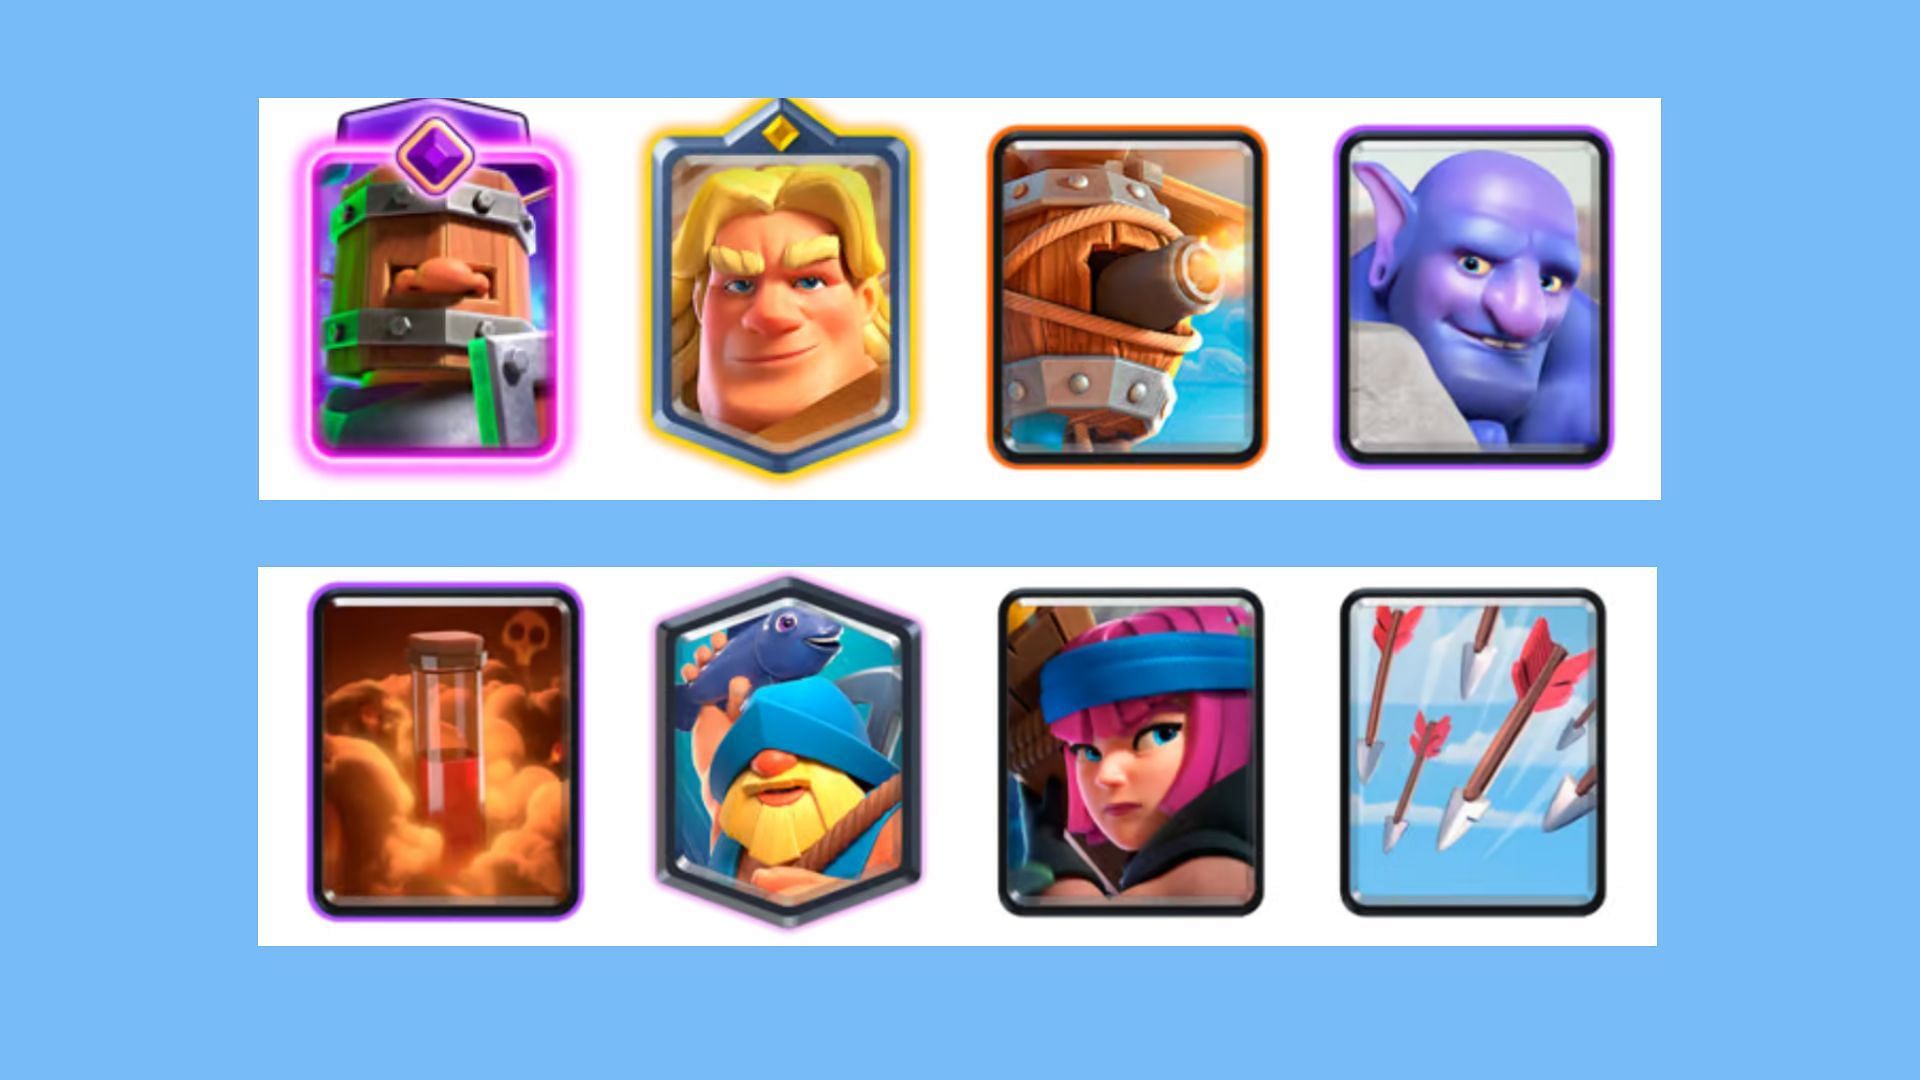 Composition of the second deck (Image via Supercell)